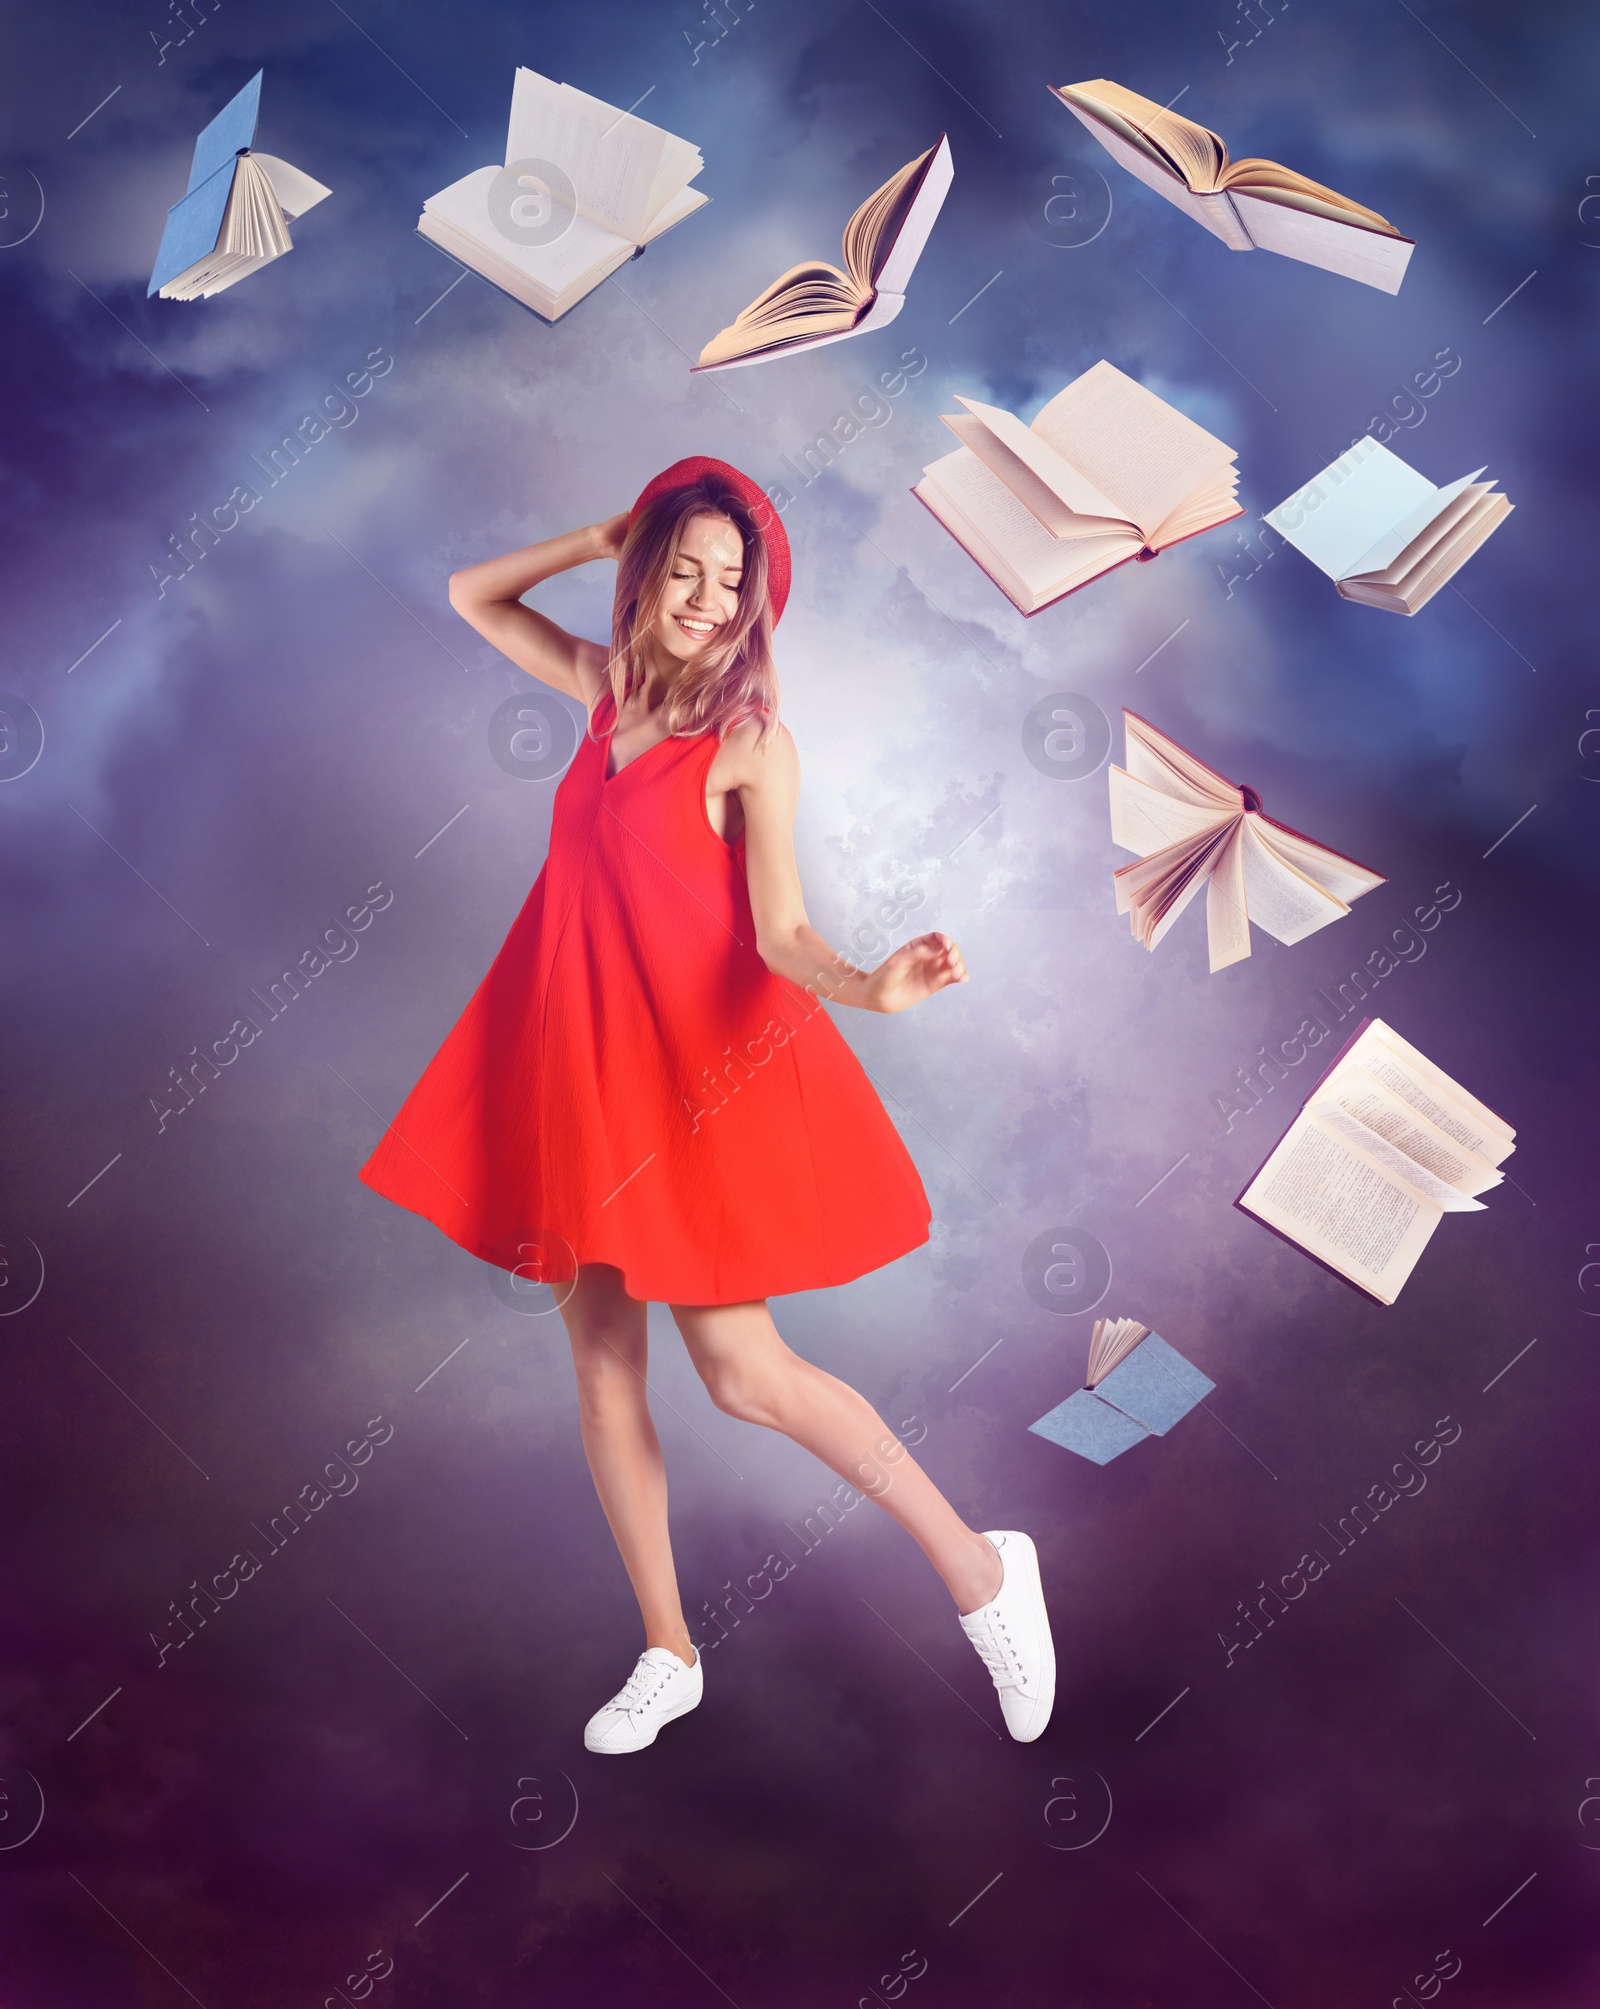 Image of Beautiful young woman in red dress dancing and flying books on color background 